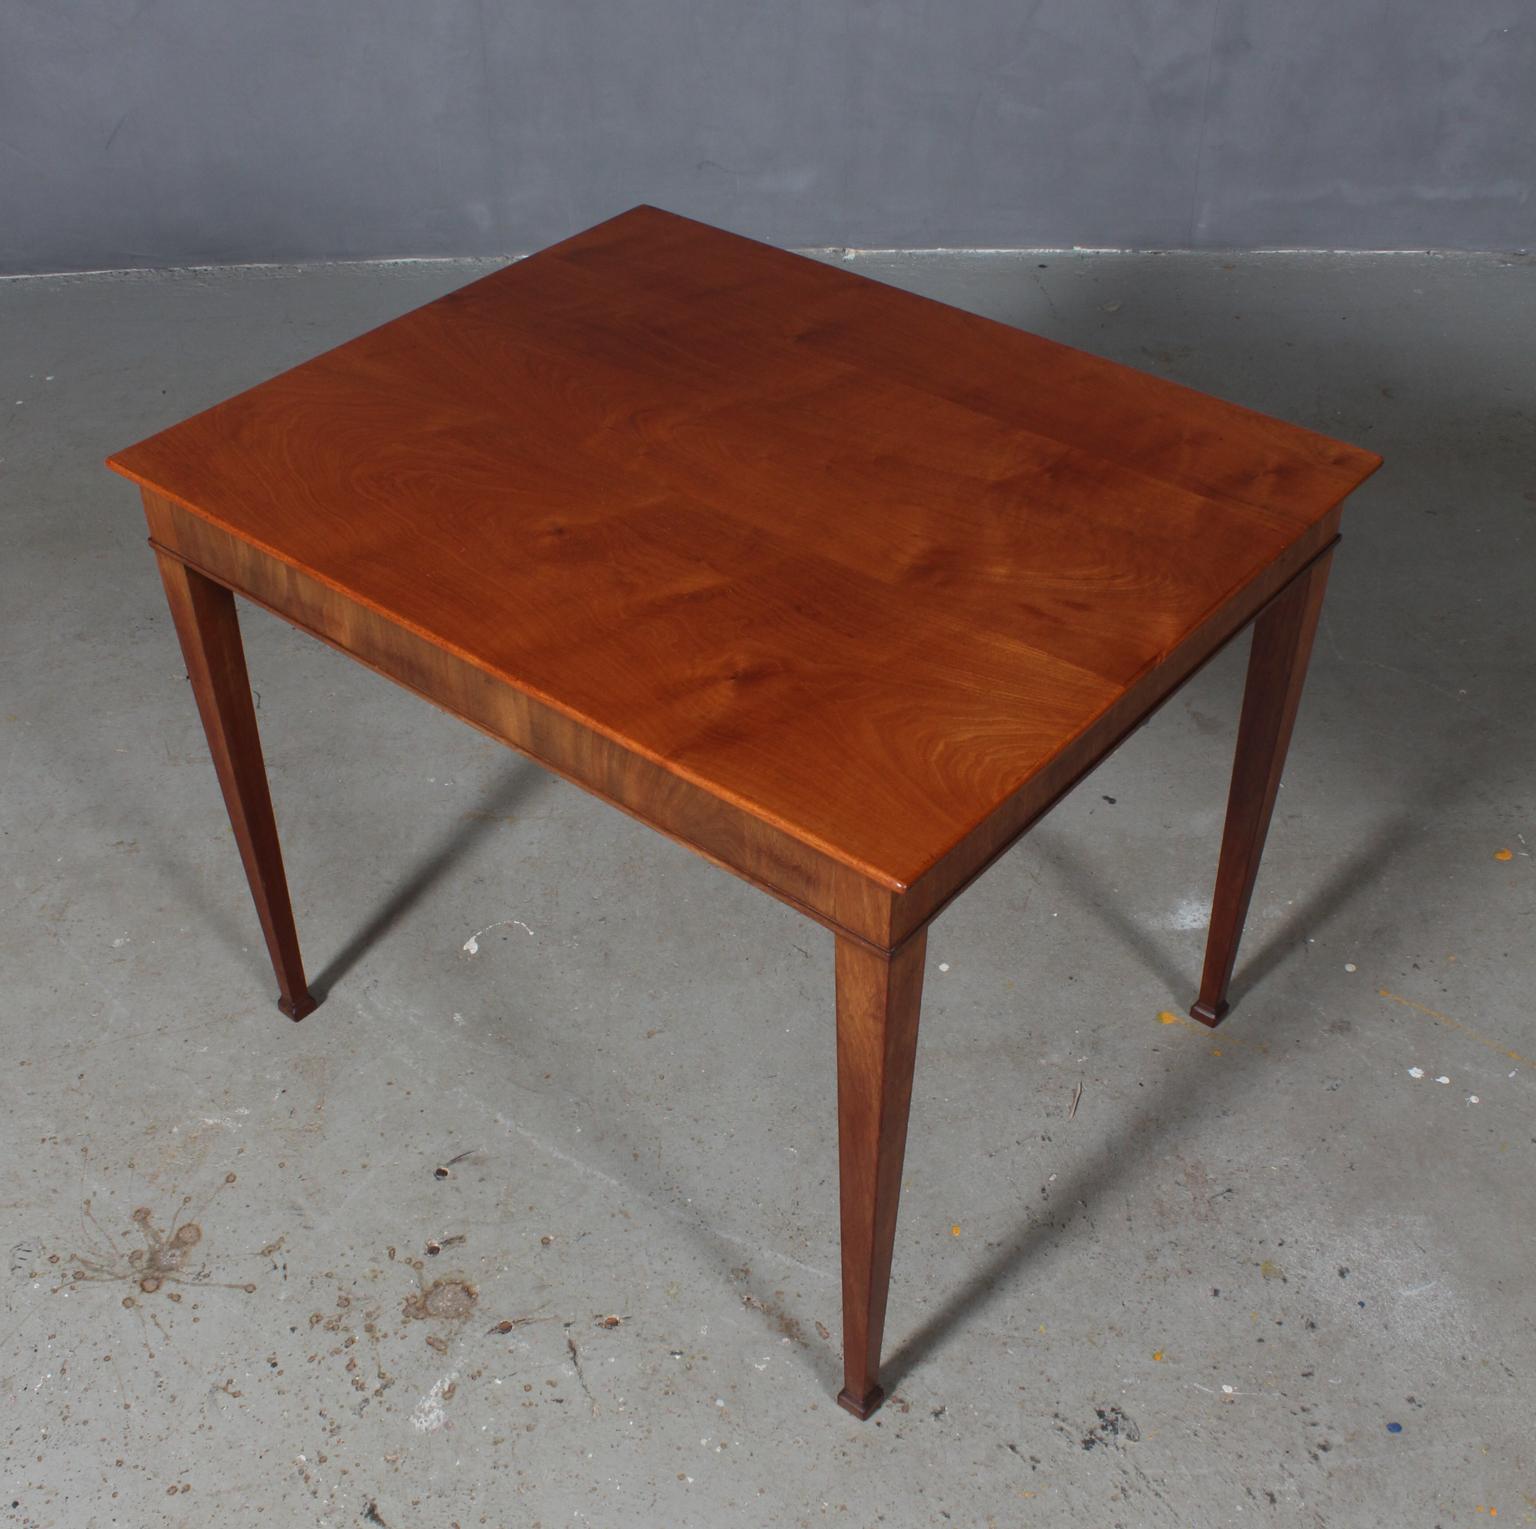 Frits Henningsen side table in Cuba Mahogany.

Designed in the 1930s, made by Frits Henningsen.
 